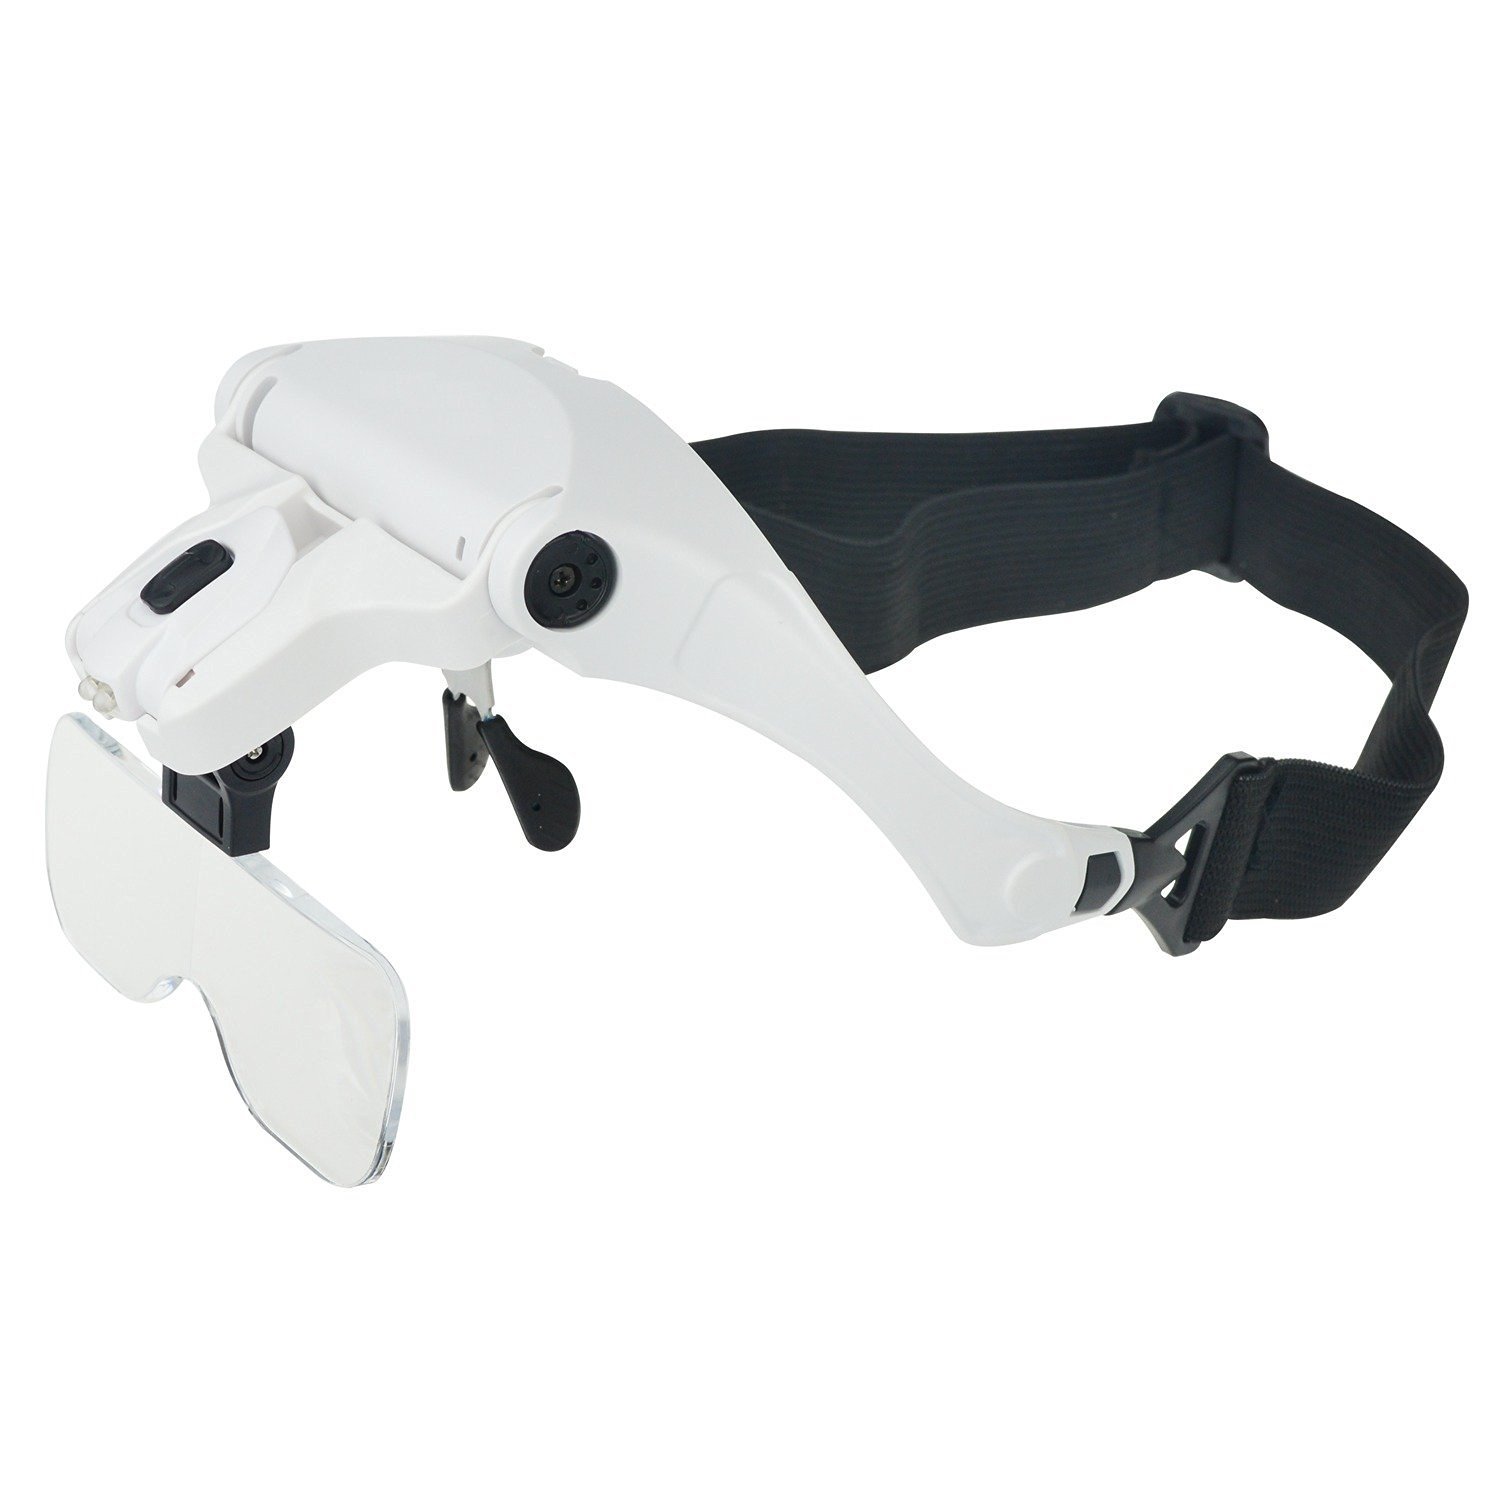 Glam Hobby h6902B Head Mount Magnifier with LED Head Light Bracket and Headband, 5 Replaceable and Interchangeable Lenses: 1.0X, 1.5X, 2.0X, 2.5X, 3.5X